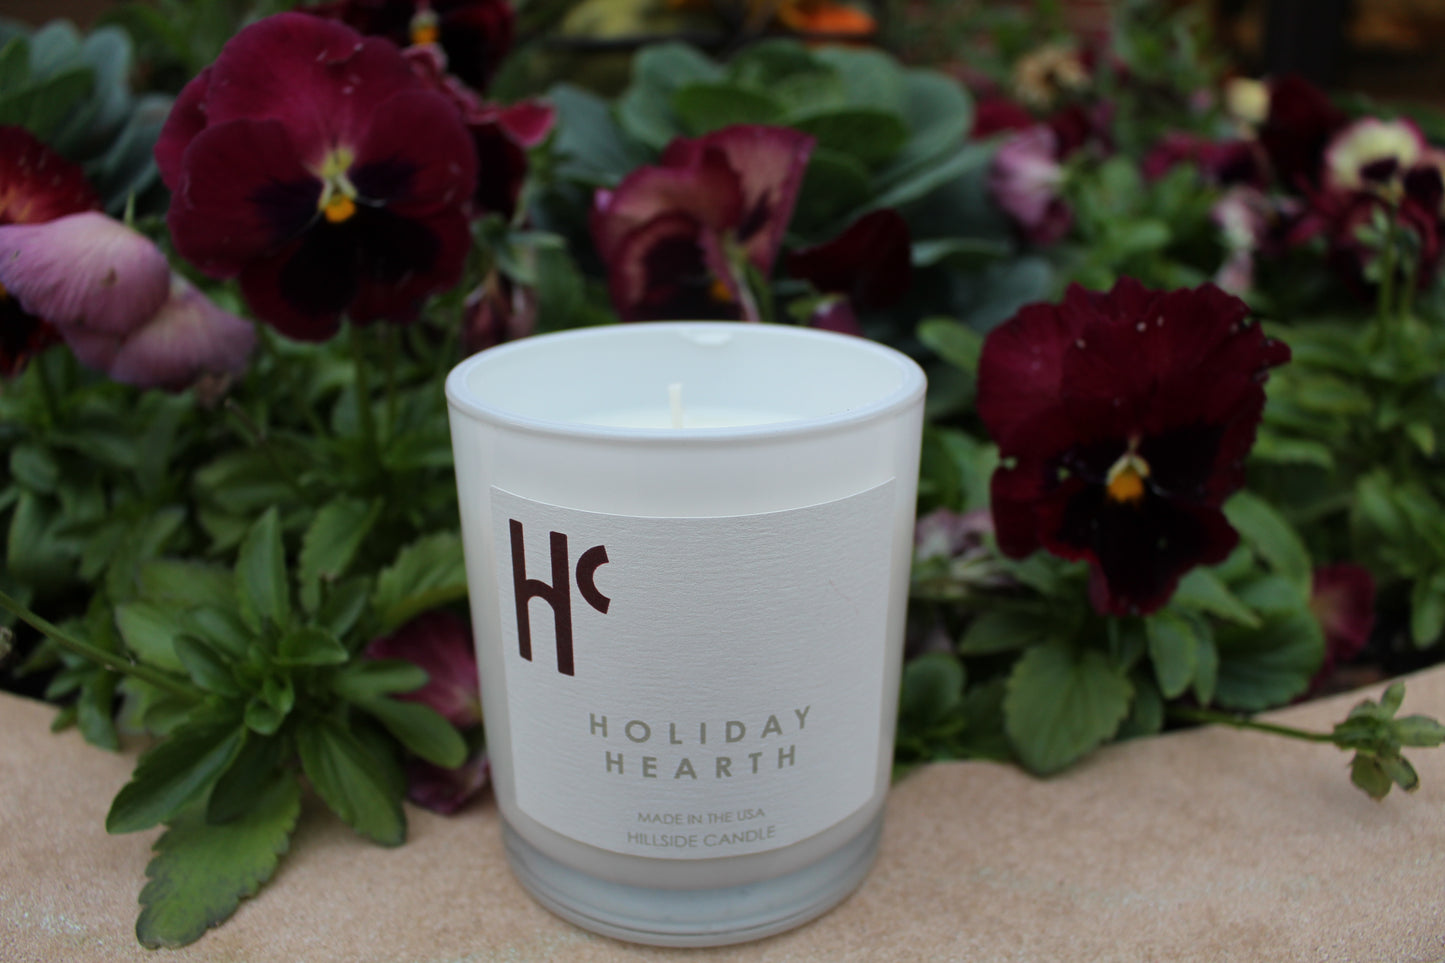 Scent Chronicles - Holiday Hearth: Where Memories Gather